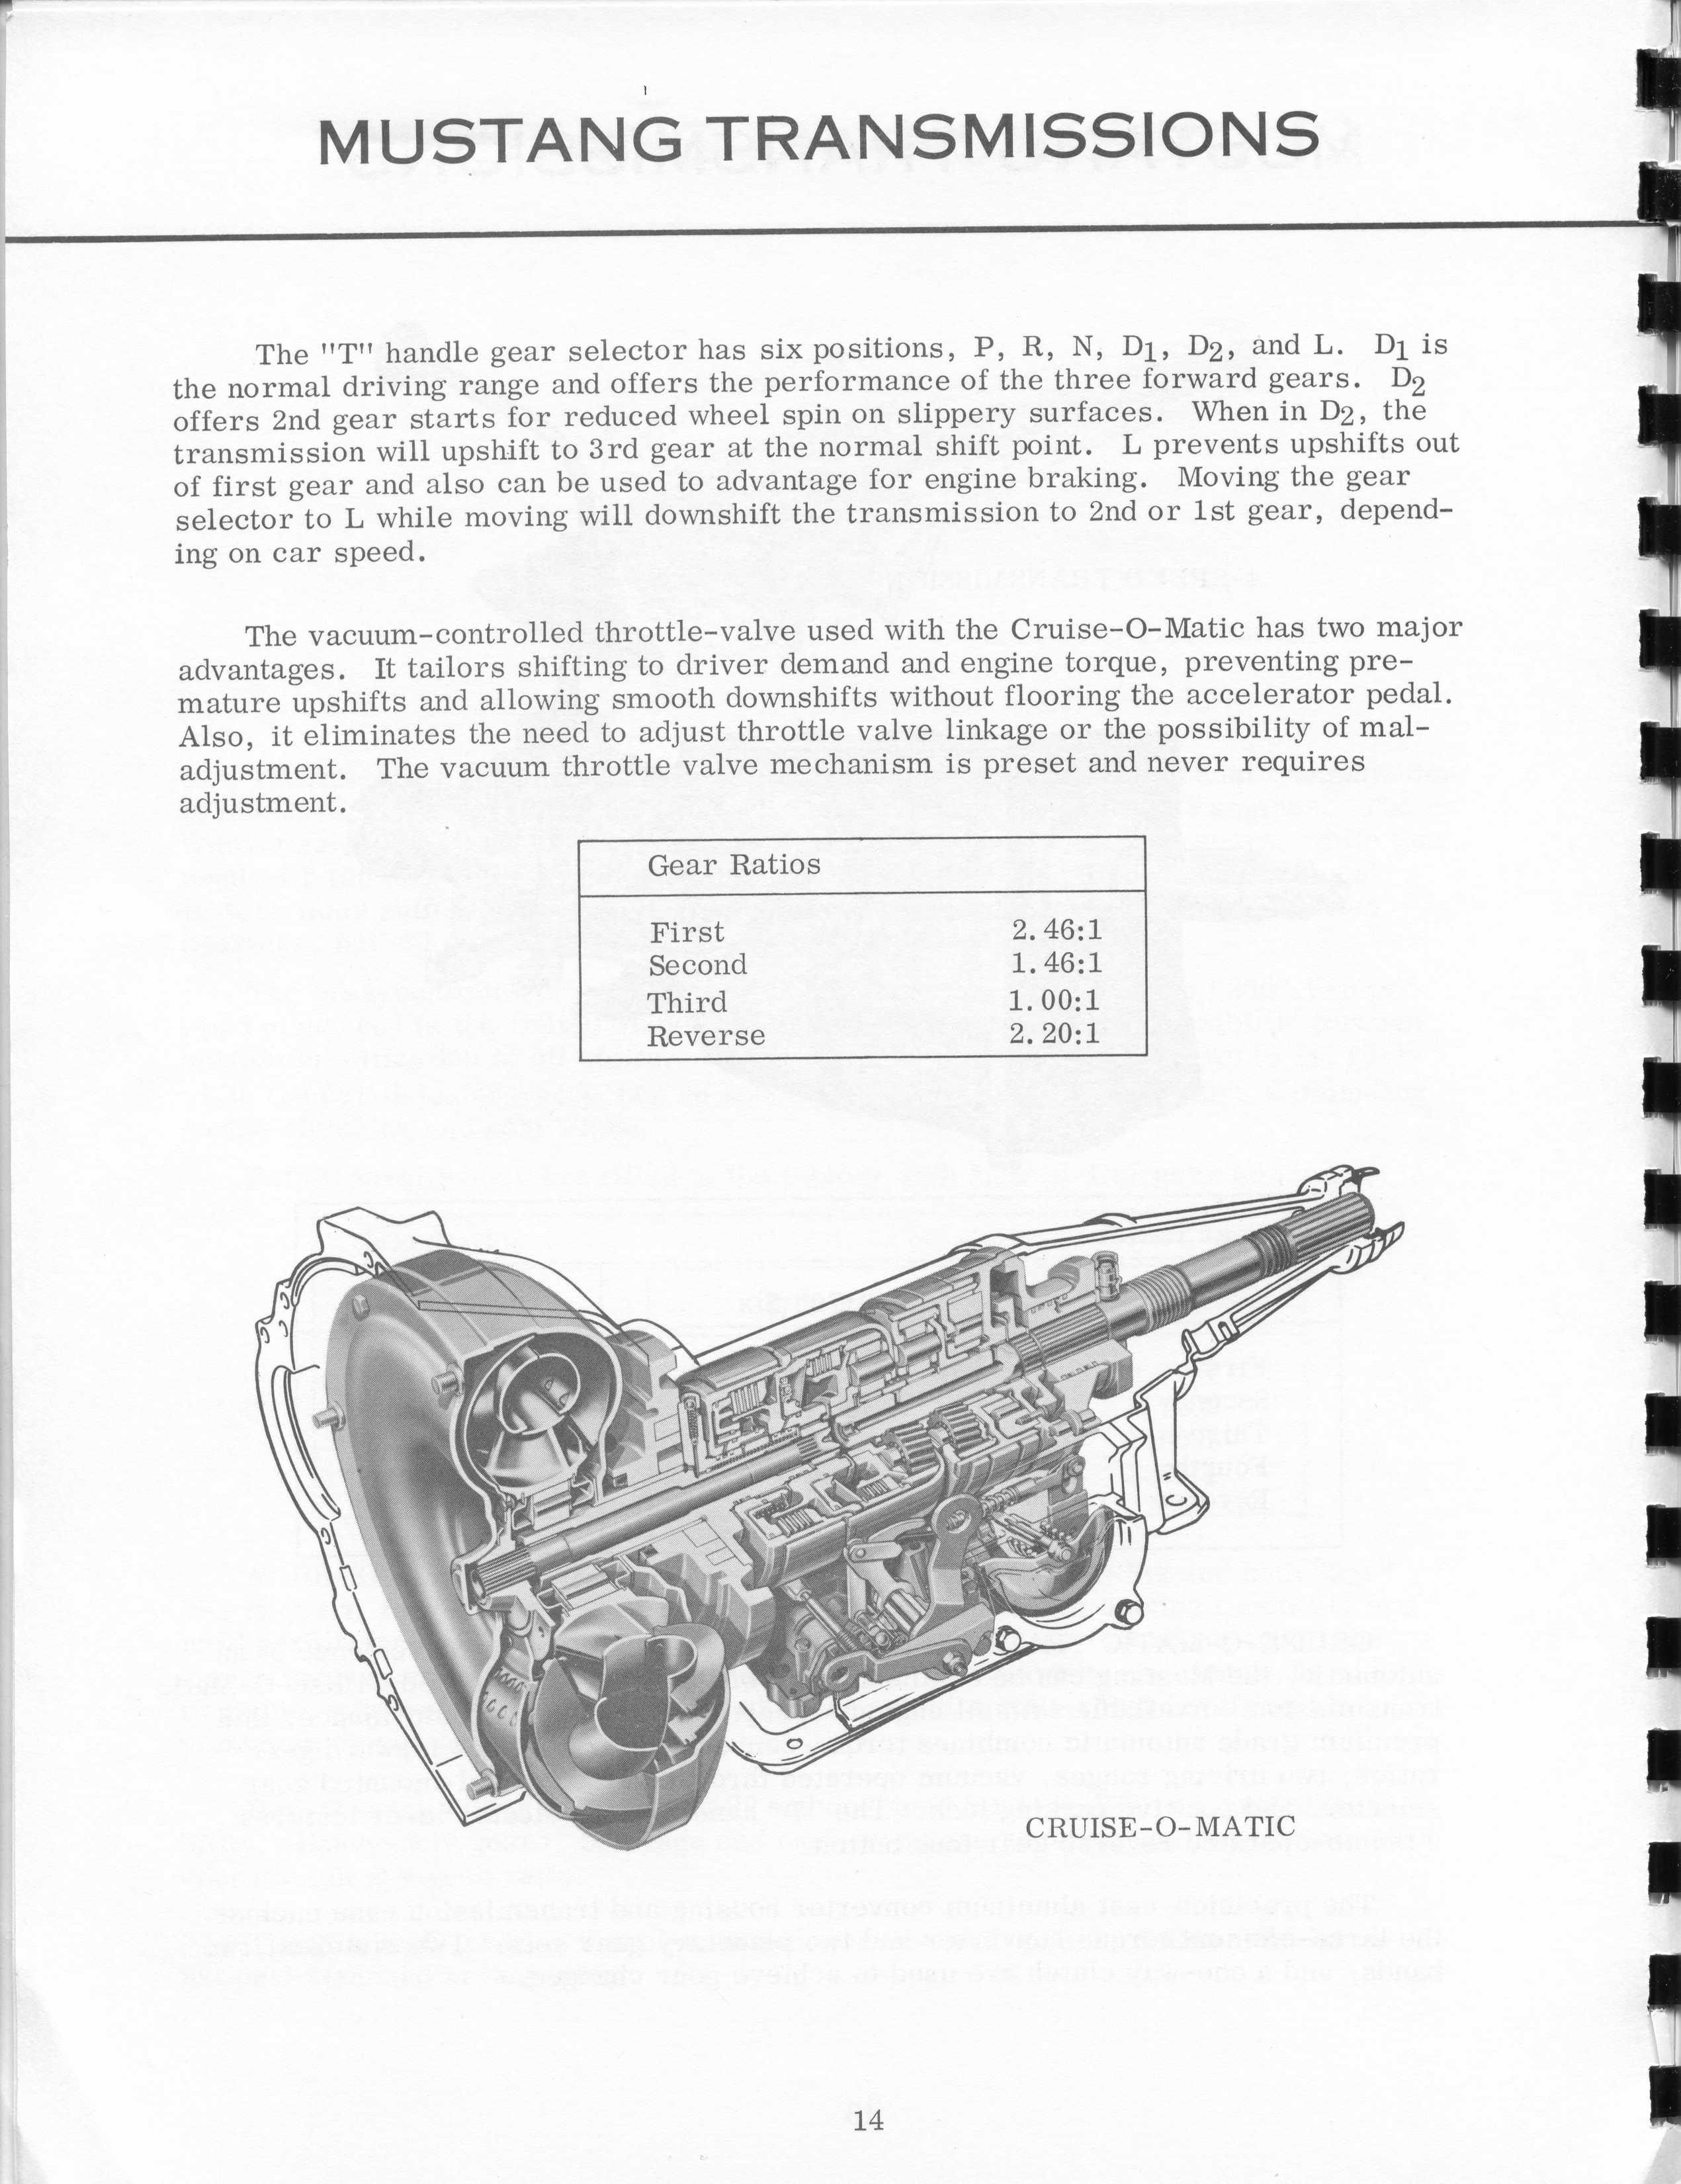 1964_Ford_Mustang_Press_Packet-14